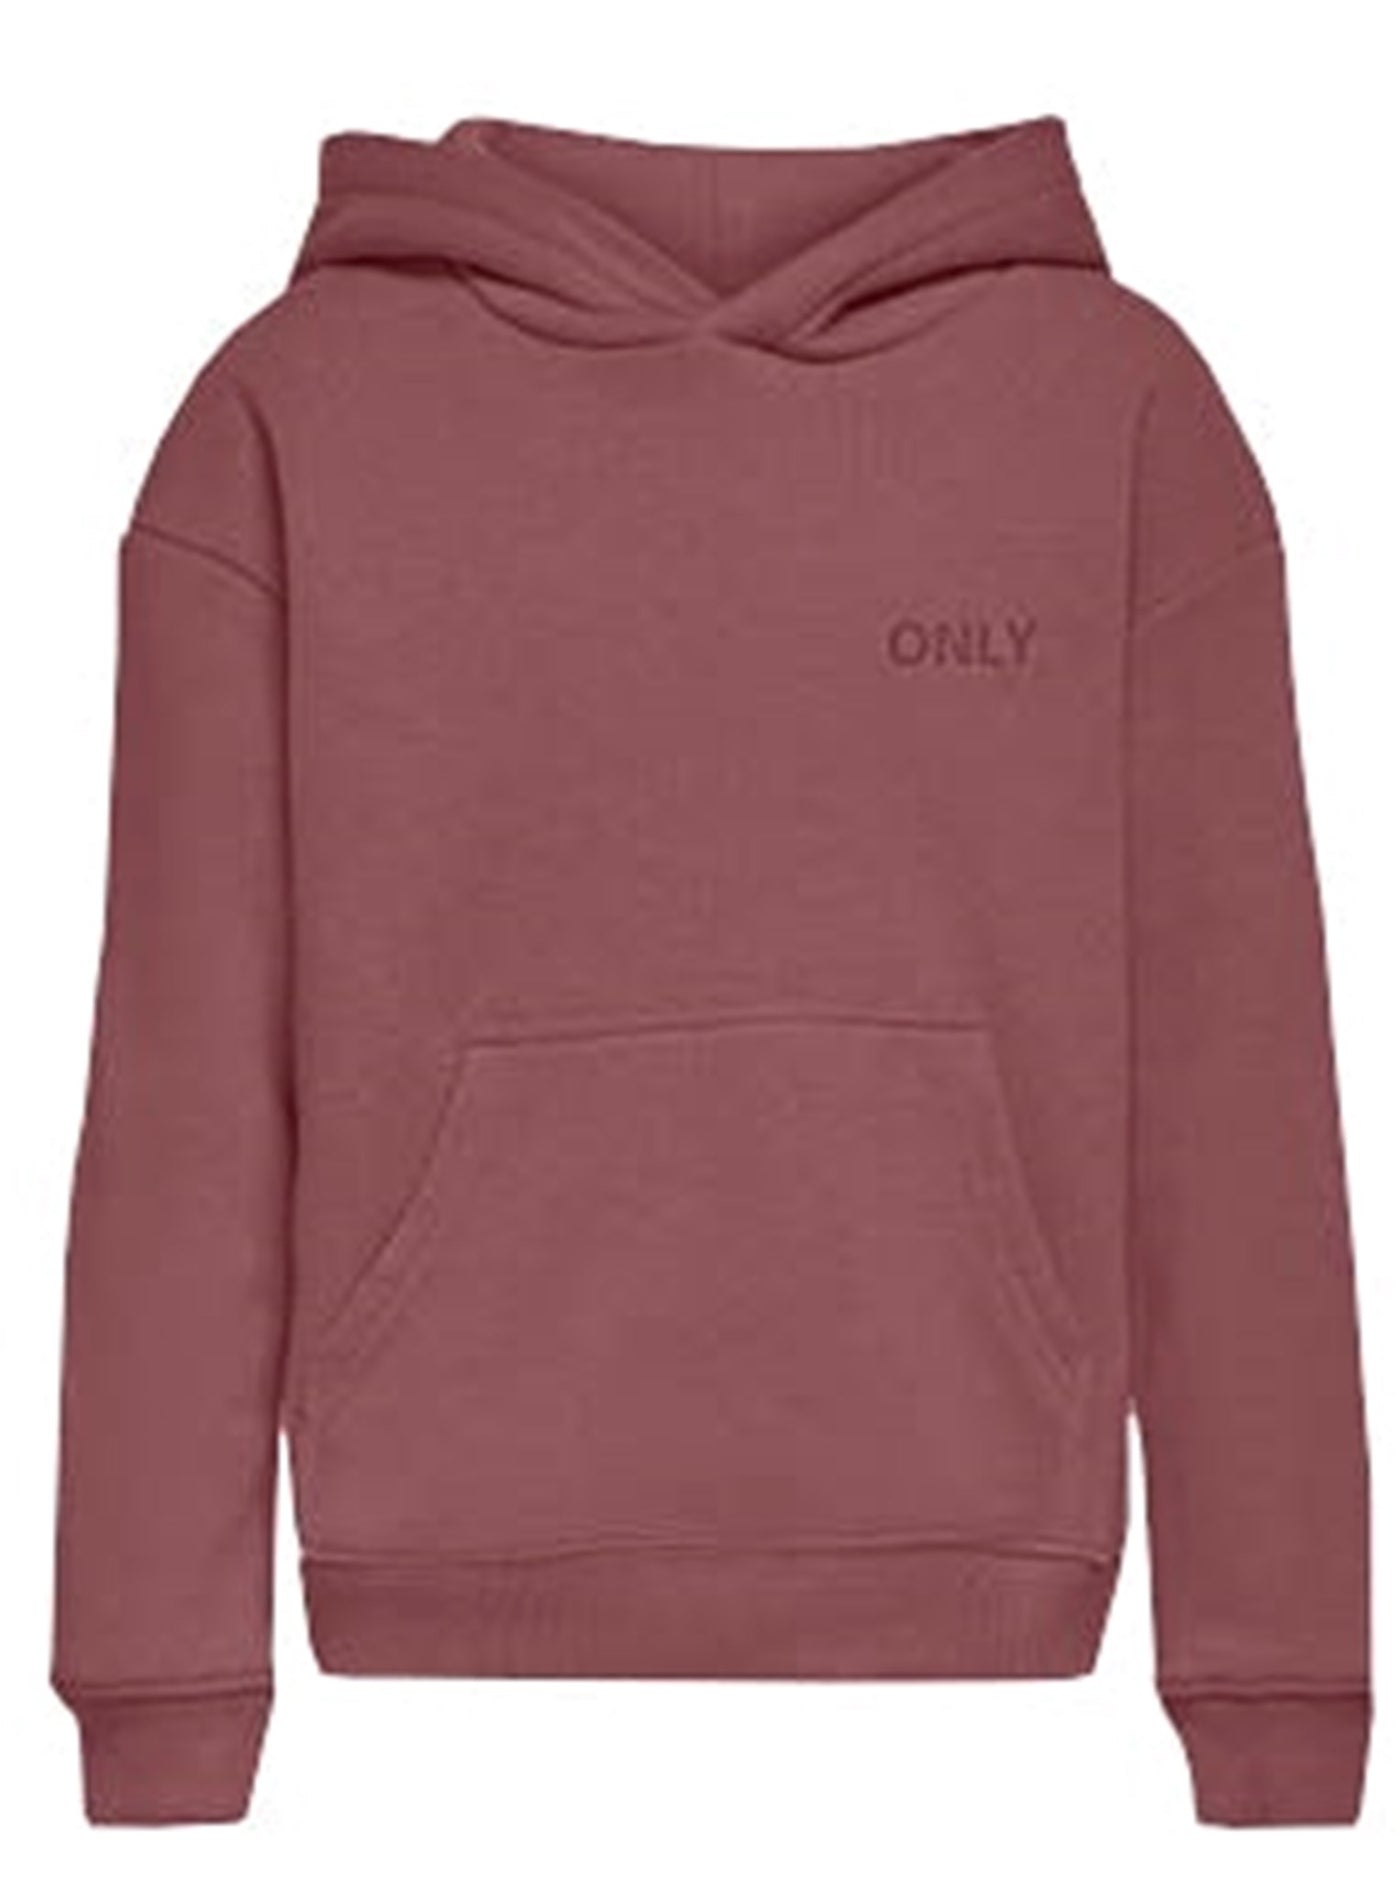 Every Life Small Logo Hoodie - Rose Brown - Kids Only